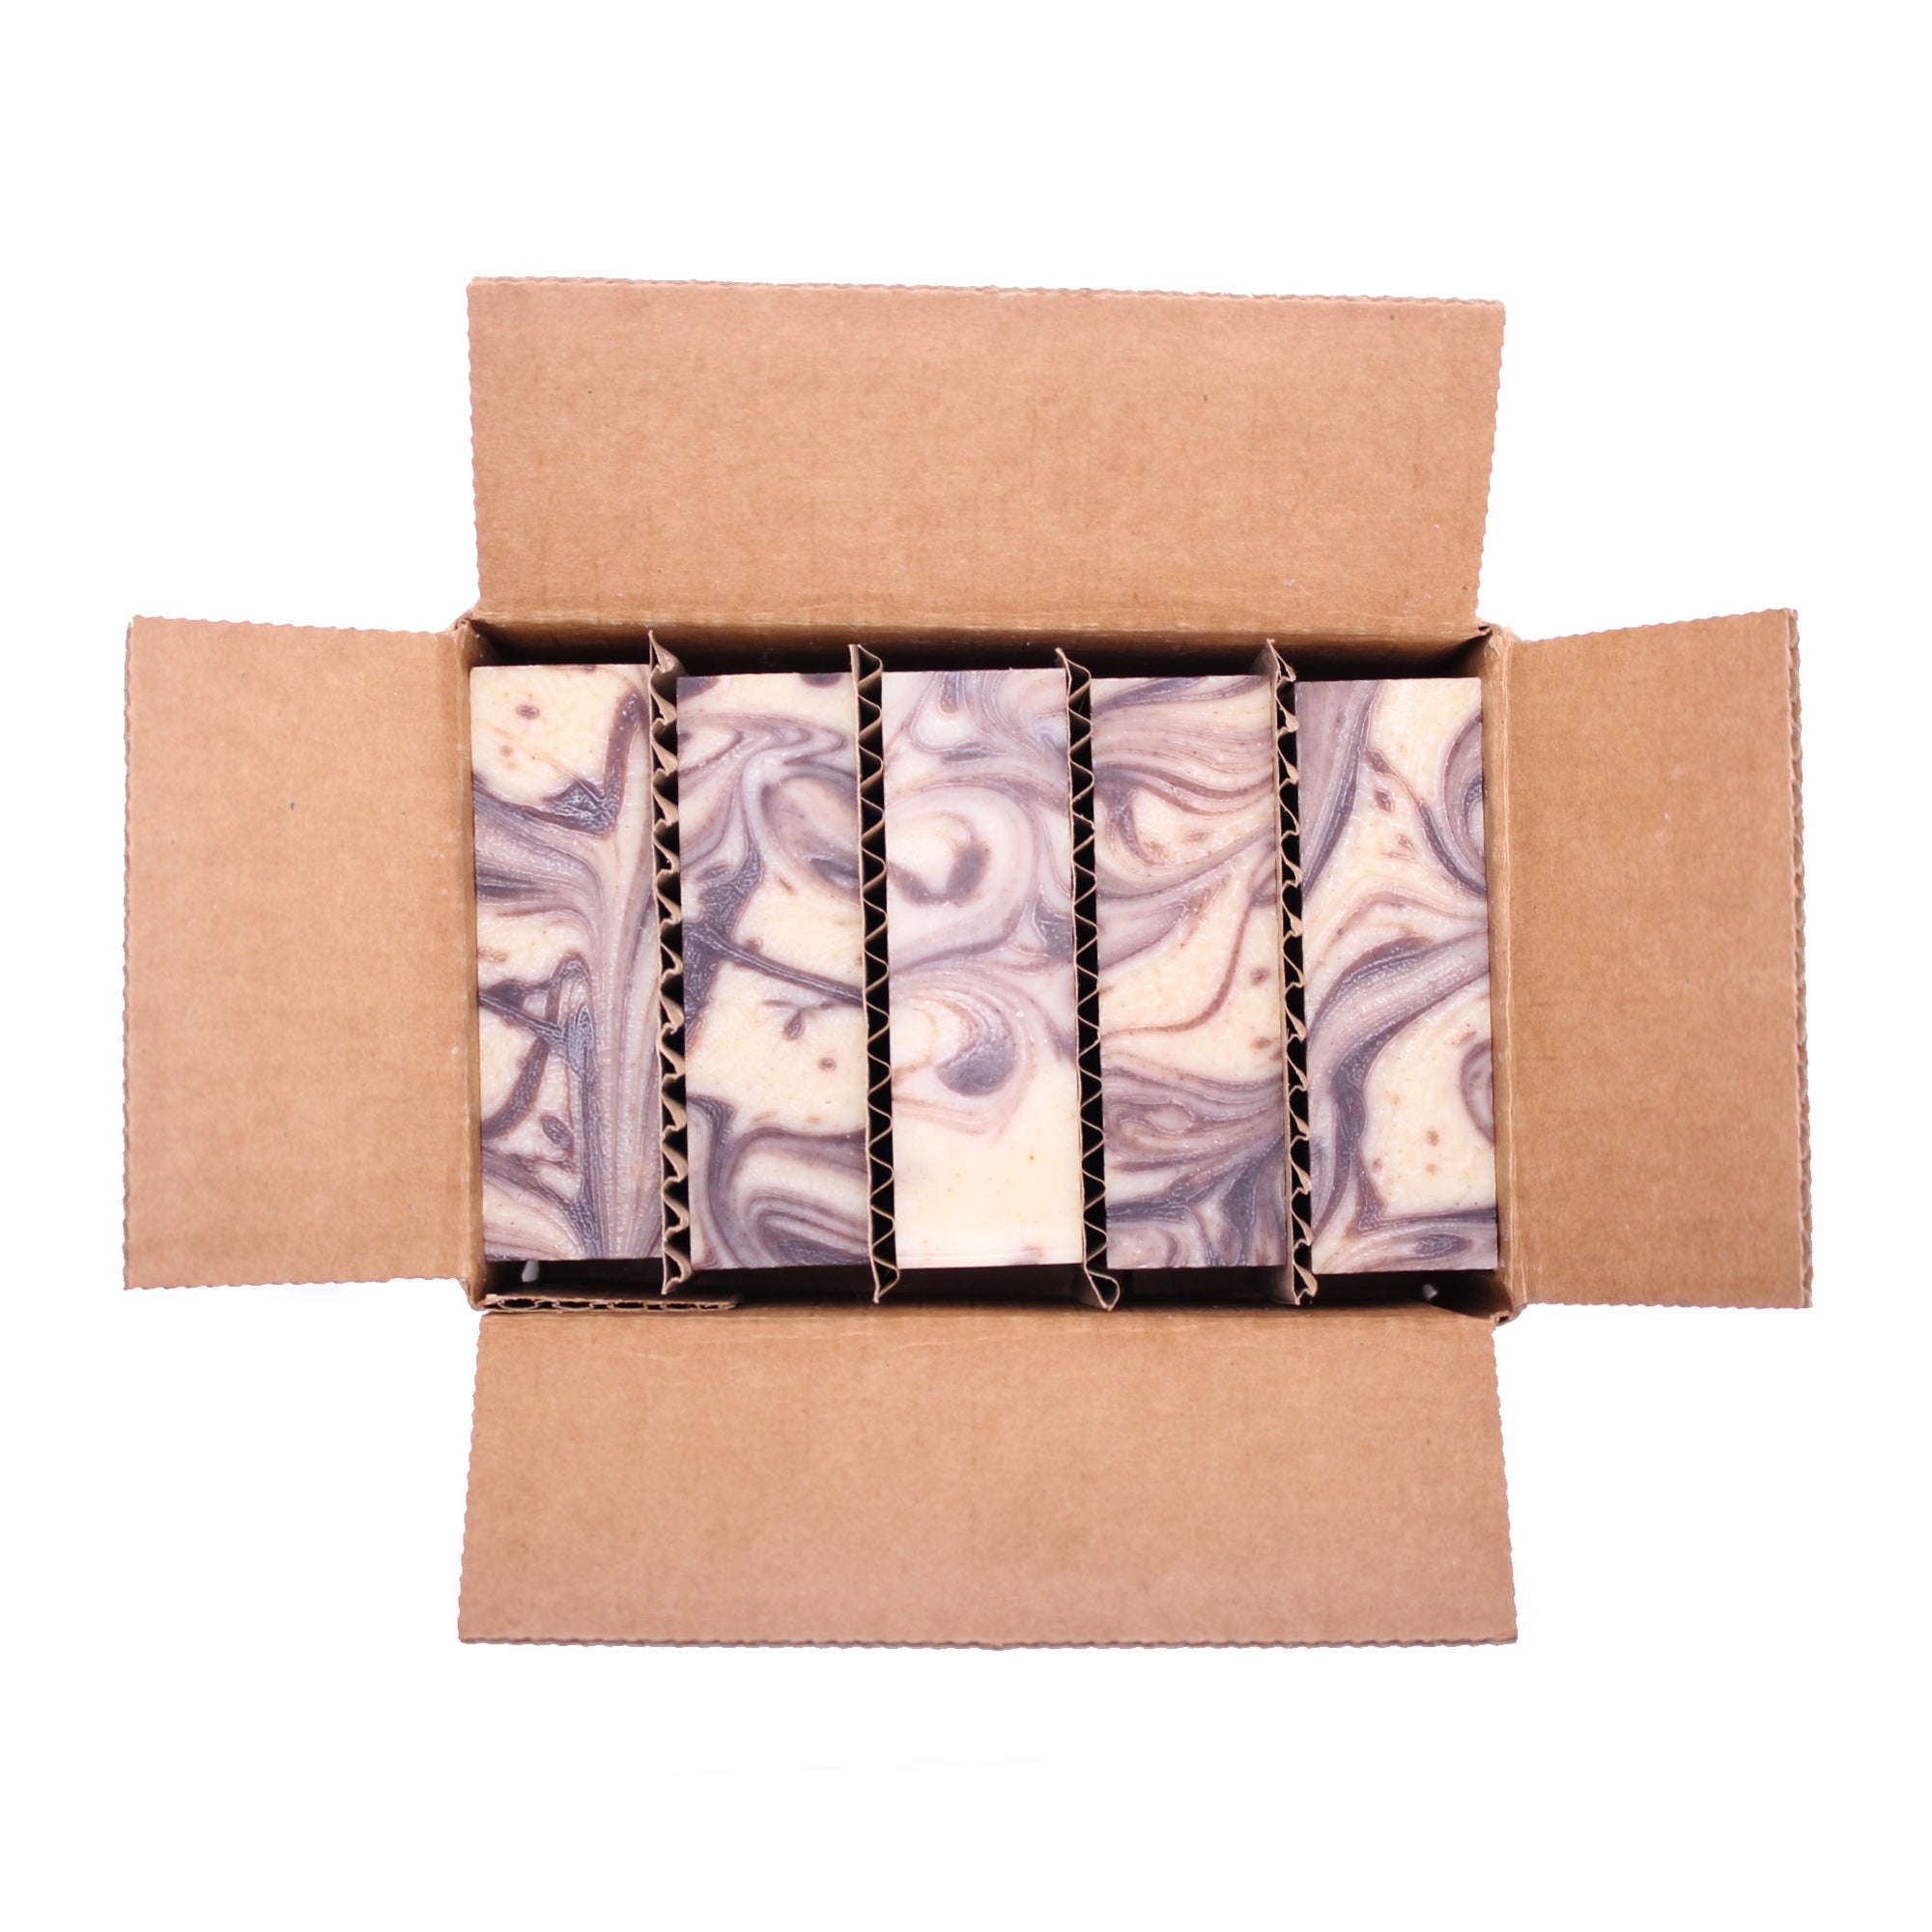 Naked five pack of Boldly Humble star anise essential oil organic bar soap from ground Soap.